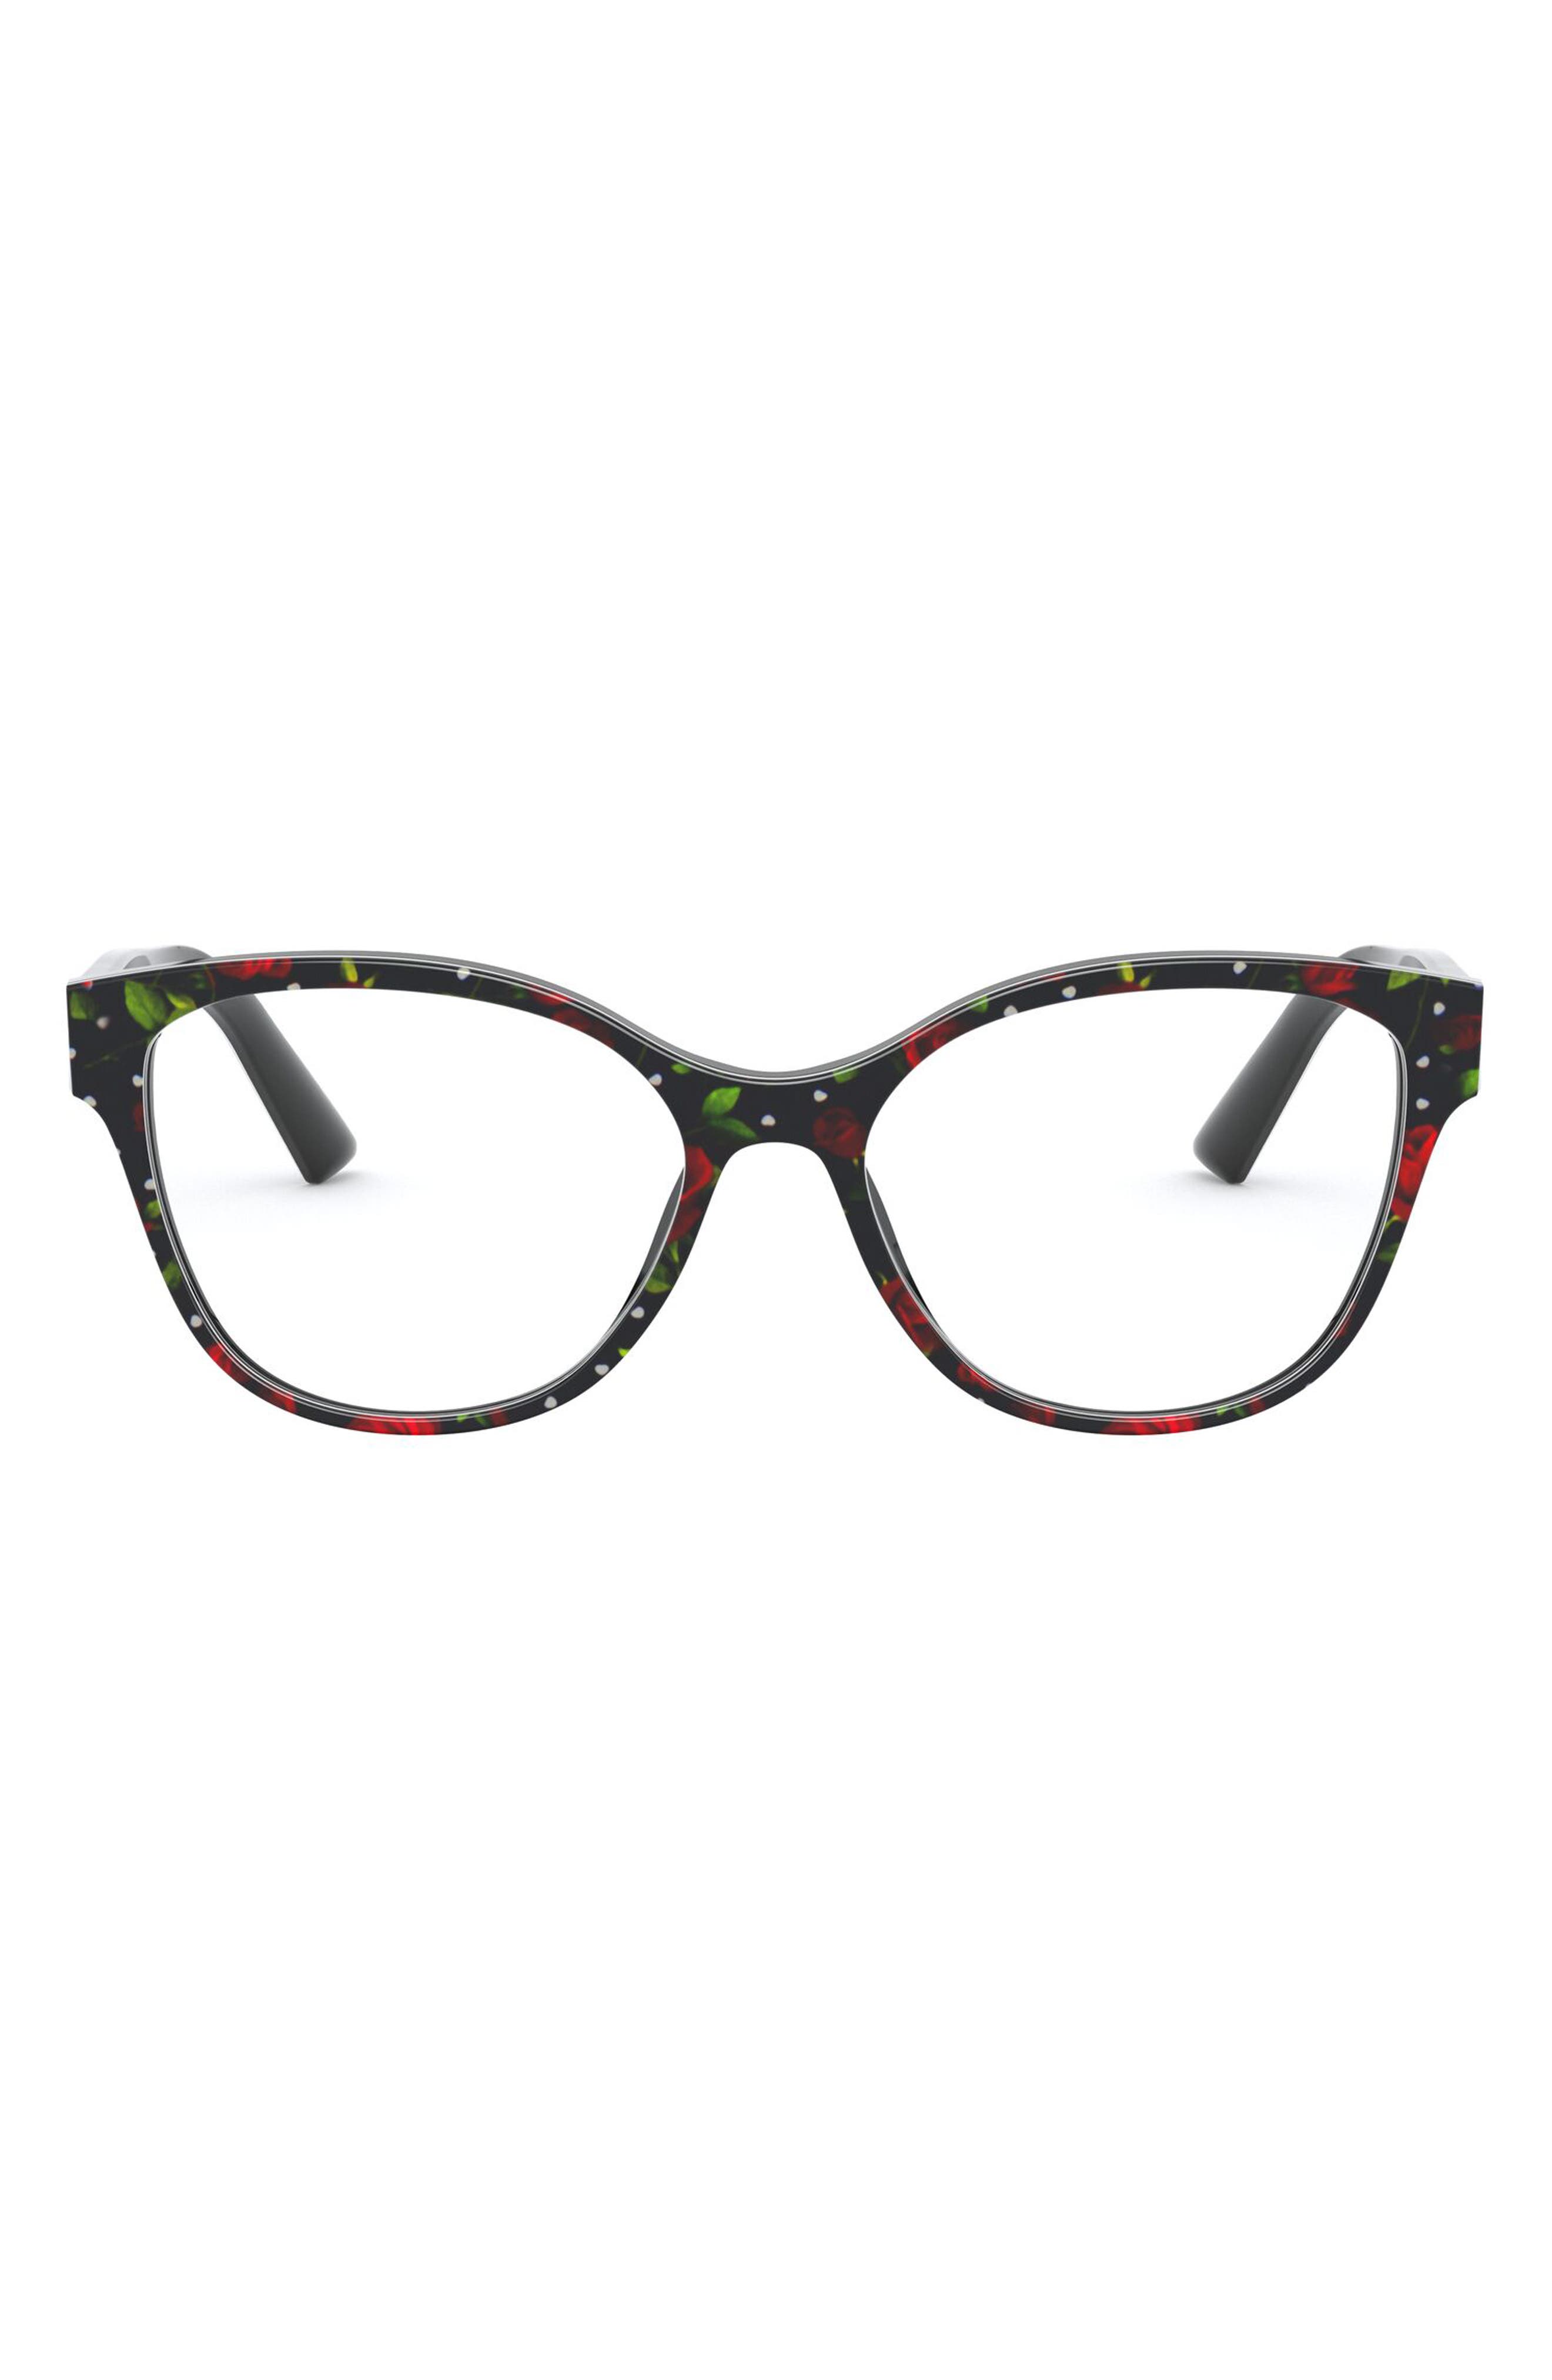 EAN 8056597127578 product image for Women's Dolce & gabbana 52mm Optical Butterfly Glasses - Print Rose | upcitemdb.com